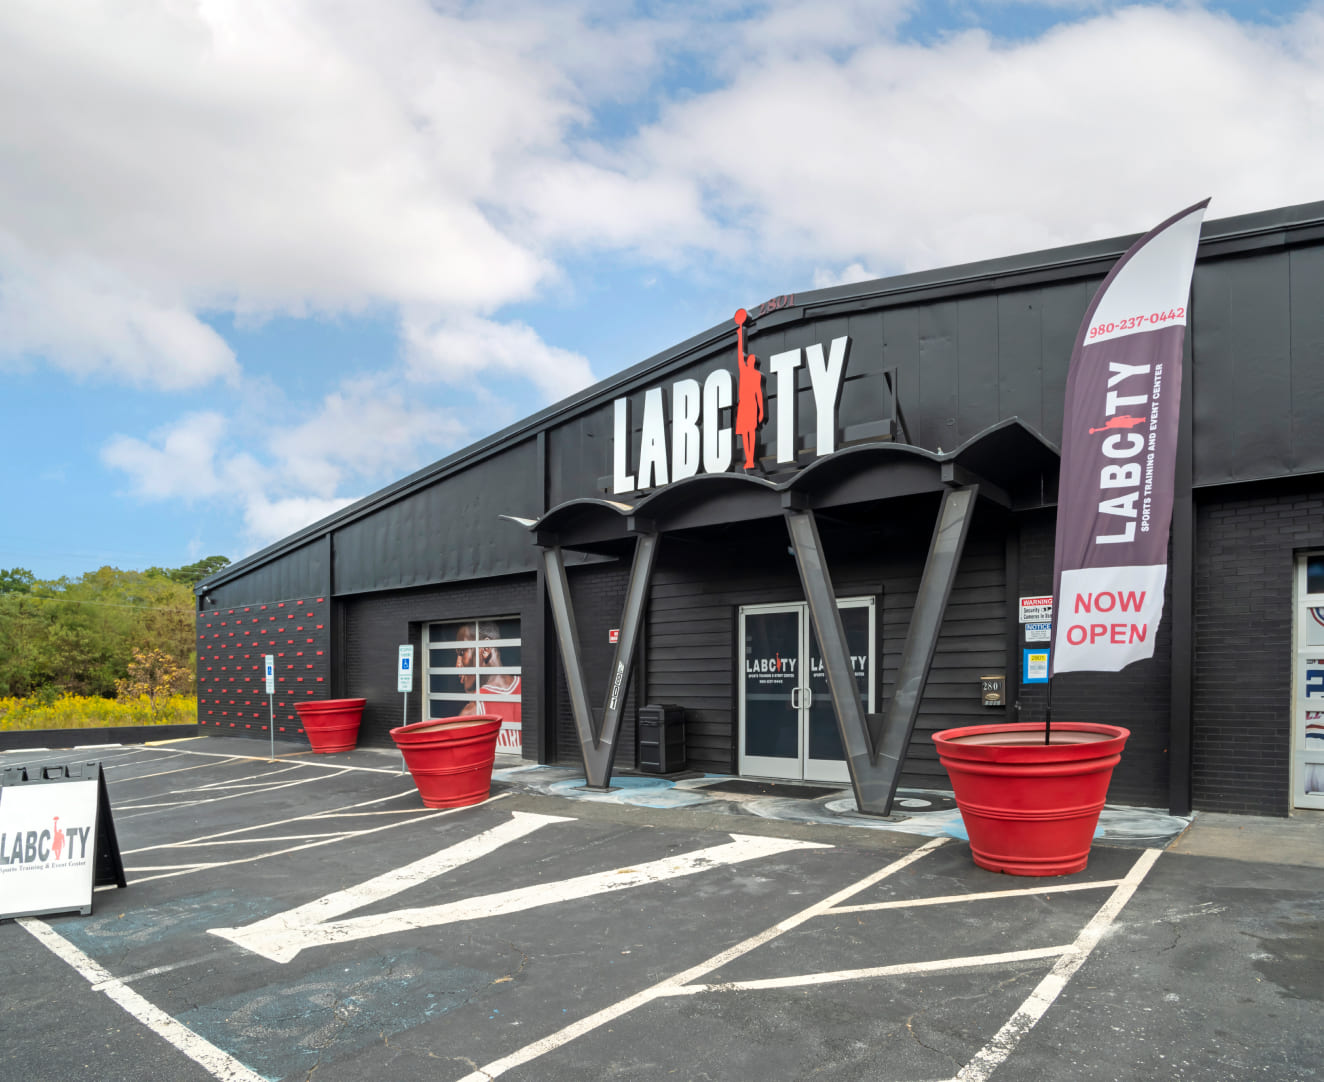 Another view of the entrance to LabCity at 2801 E. Independence Blvd in Charlotte, NC